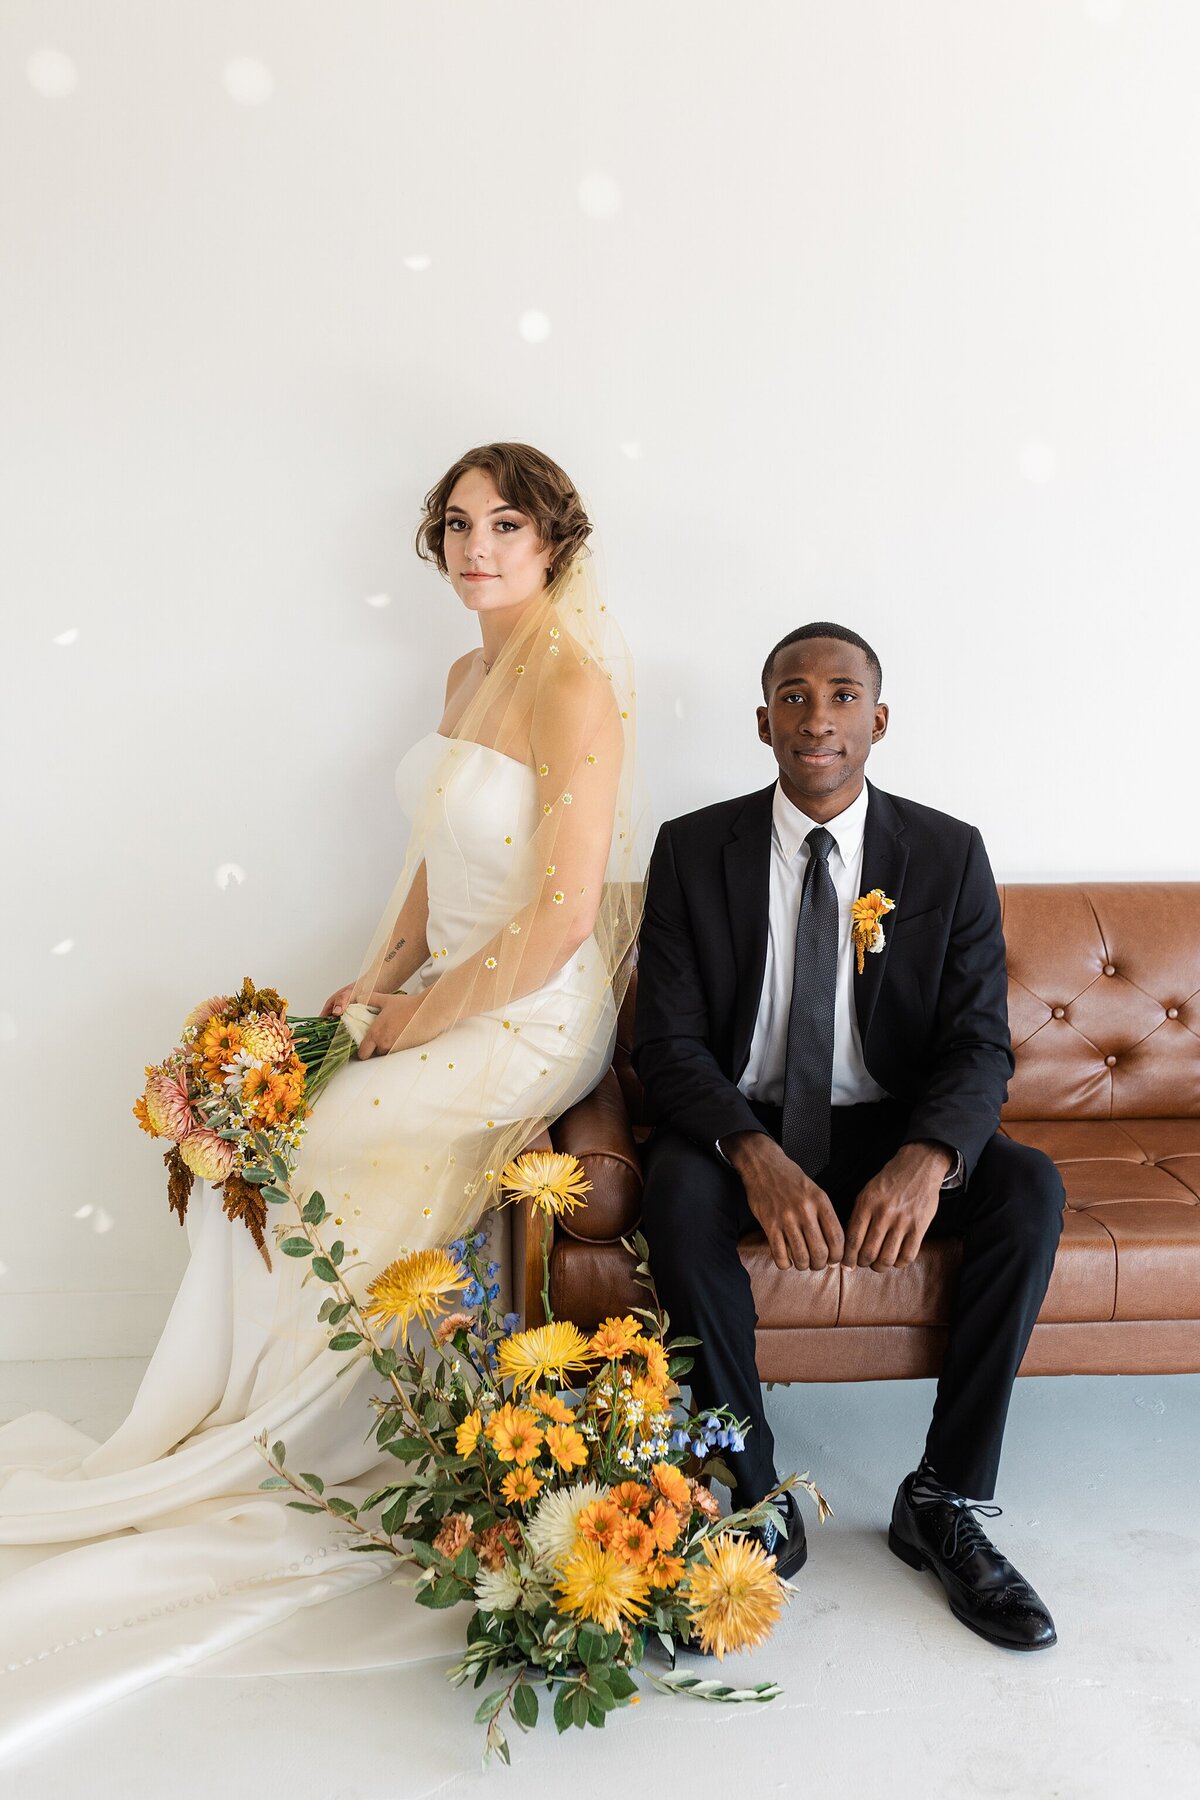 An editorial portrait of a bride and groom posing together on a leather couch on their wedding day in Dallas, Texas. The bride is on the left and is wearing an elegant, long, white dress with a golden veil and is holding a bouquet. The groom is on the right and is wearing a black suit with a boutonniere. A large floral arrangement rests on the ground between them.